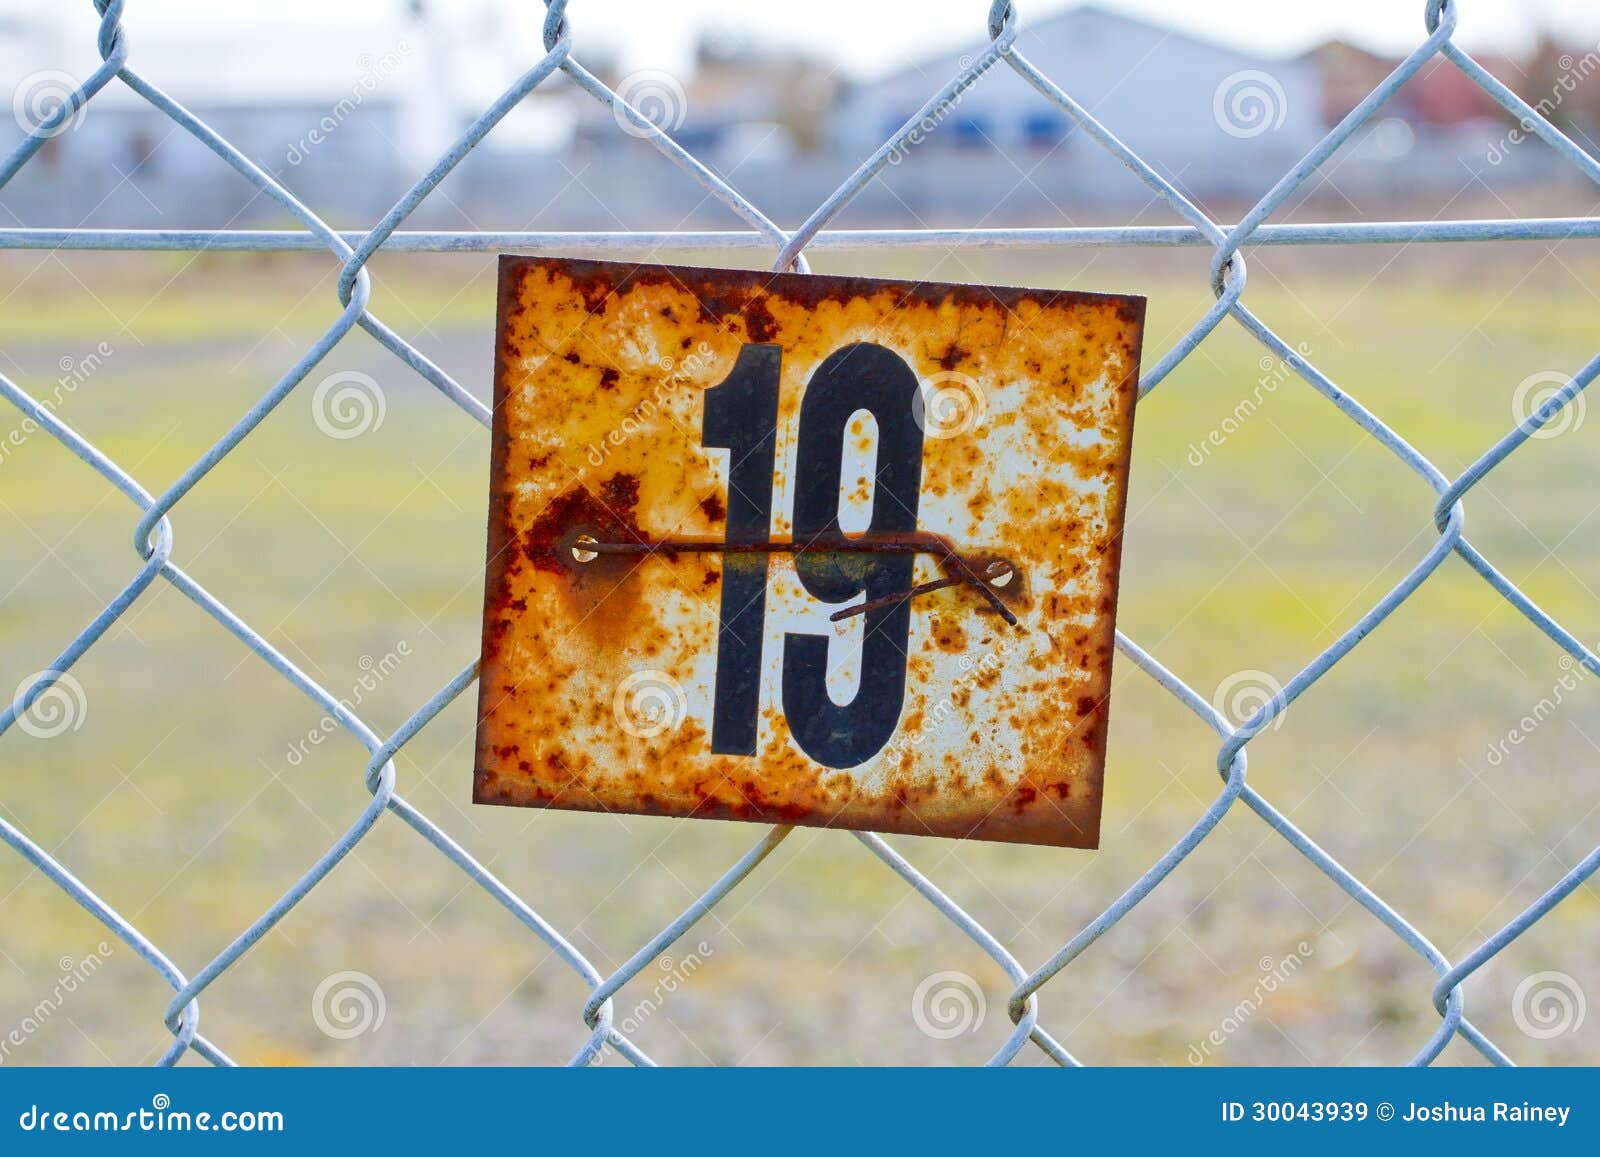 series-rusted-old-signs-tags-attached-to-chain-link-fence-orange-white-rust-numbers-clearly-visible-30043939.jpg